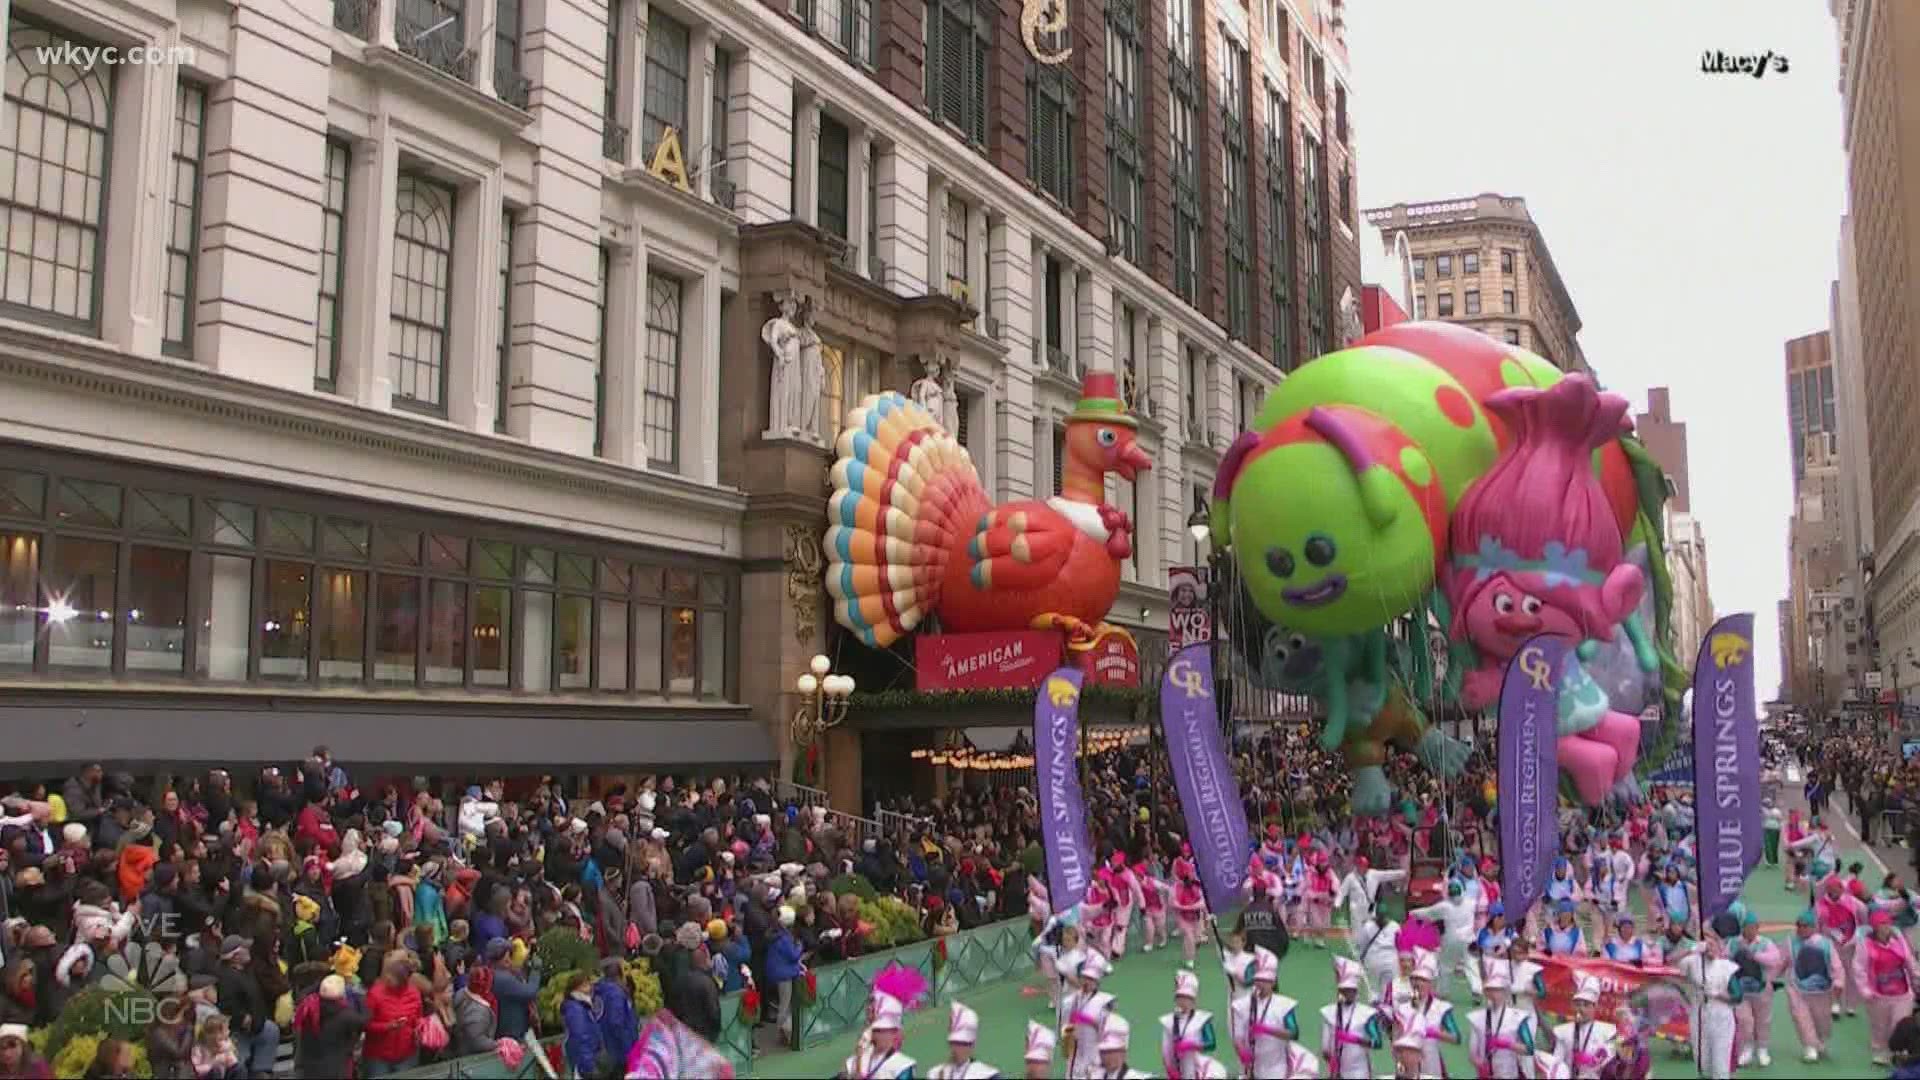 Nov. 10, 2020: Here is how events like the Macy's Thanksgiving Day Parade and New Year's Eve in Times Square will be different in 2020 amid the COVID-19 pandemic.